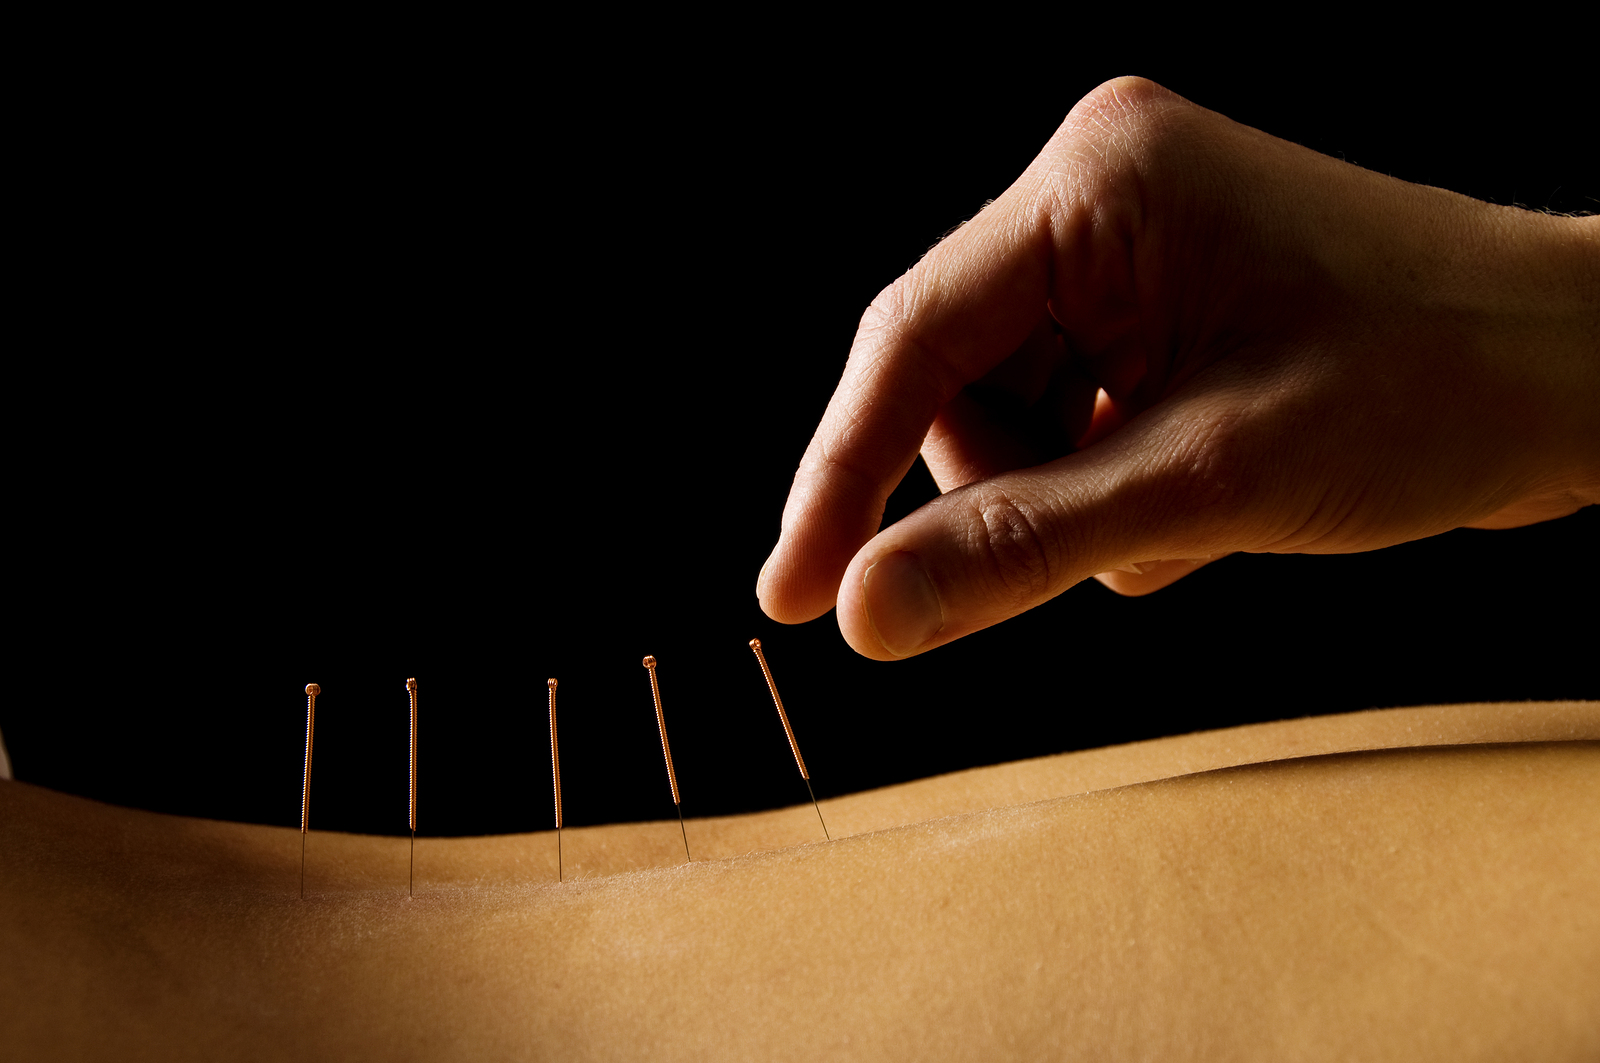 Acupuncture may relieve pain in fibromyalgia patients